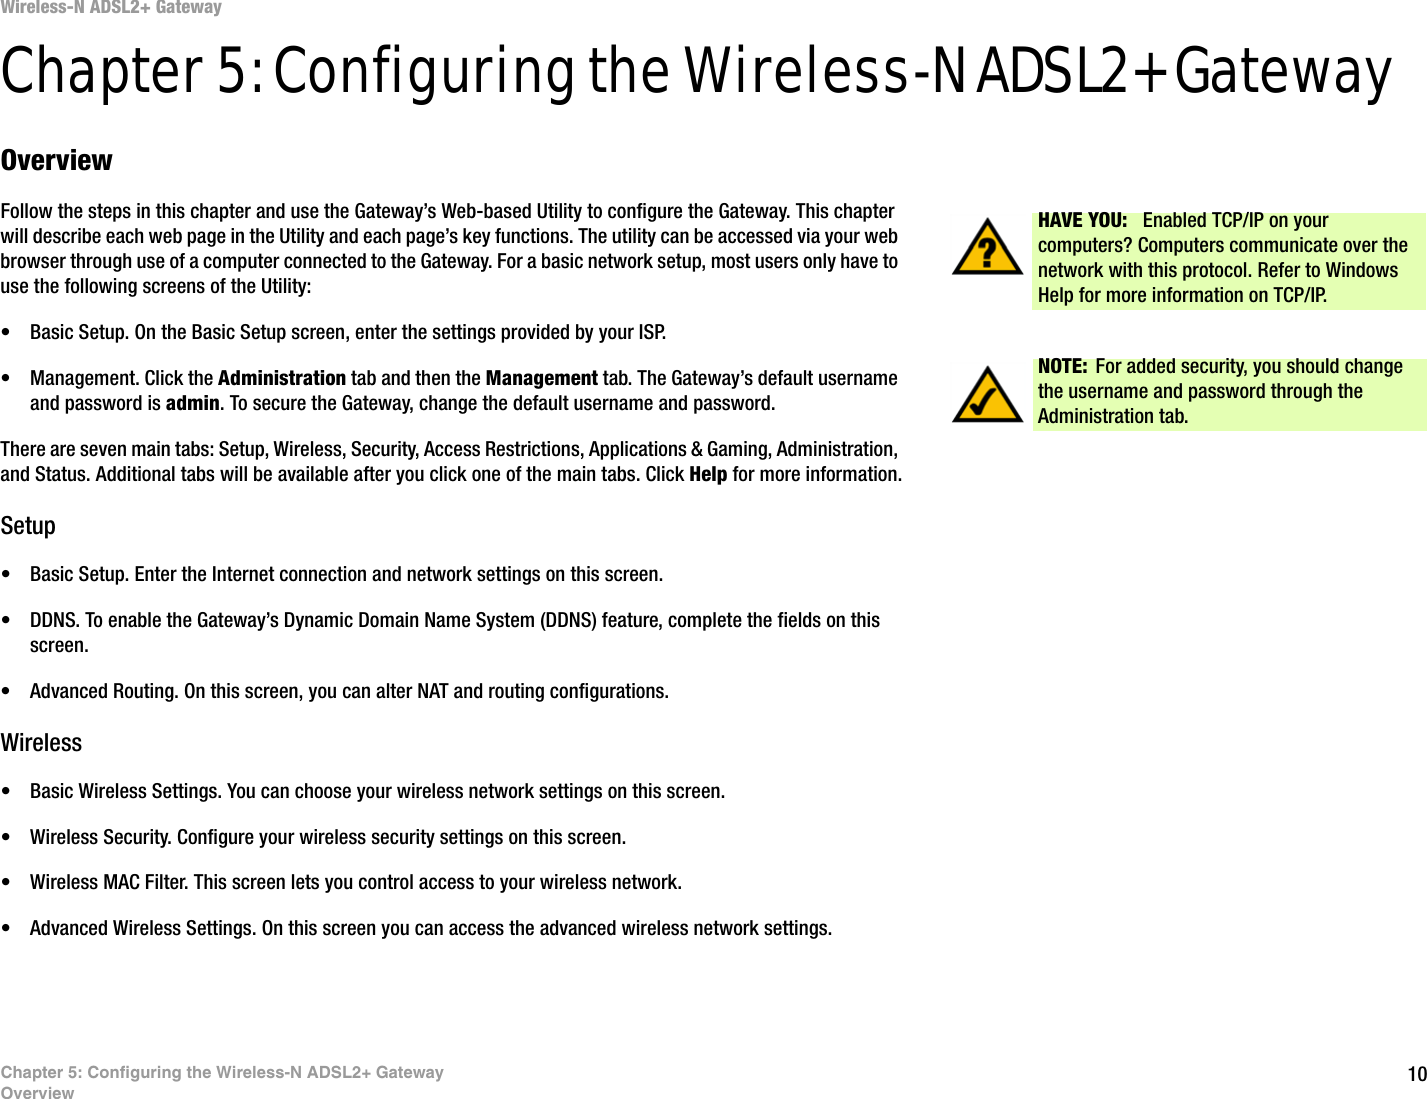 10Chapter 5: Configuring the Wireless-N ADSL2+ GatewayOverviewWireless-N ADSL2+ GatewayChapter 5: Configuring the Wireless-N ADSL2+ GatewayOverviewFollow the steps in this chapter and use the Gateway’s Web-based Utility to configure the Gateway. This chapter will describe each web page in the Utility and each page’s key functions. The utility can be accessed via your web browser through use of a computer connected to the Gateway. For a basic network setup, most users only have to use the following screens of the Utility:• Basic Setup. On the Basic Setup screen, enter the settings provided by your ISP.• Management. Click the Administration tab and then the Management tab. The Gateway’s default username and password is admin. To secure the Gateway, change the default username and password.There are seven main tabs: Setup, Wireless, Security, Access Restrictions, Applications &amp; Gaming, Administration, and Status. Additional tabs will be available after you click one of the main tabs. Click Help for more information.Setup• Basic Setup. Enter the Internet connection and network settings on this screen.• DDNS. To enable the Gateway’s Dynamic Domain Name System (DDNS) feature, complete the fields on this screen.• Advanced Routing. On this screen, you can alter NAT and routing configurations.Wireless• Basic Wireless Settings. You can choose your wireless network settings on this screen.• Wireless Security. Configure your wireless security settings on this screen.• Wireless MAC Filter. This screen lets you control access to your wireless network.• Advanced Wireless Settings. On this screen you can access the advanced wireless network settings.NOTE: For added security, you should change the username and password through the Administration tab.HAVE YOU: Enabled TCP/IP on your computers? Computers communicate over the network with this protocol. Refer to Windows Help for more information on TCP/IP.